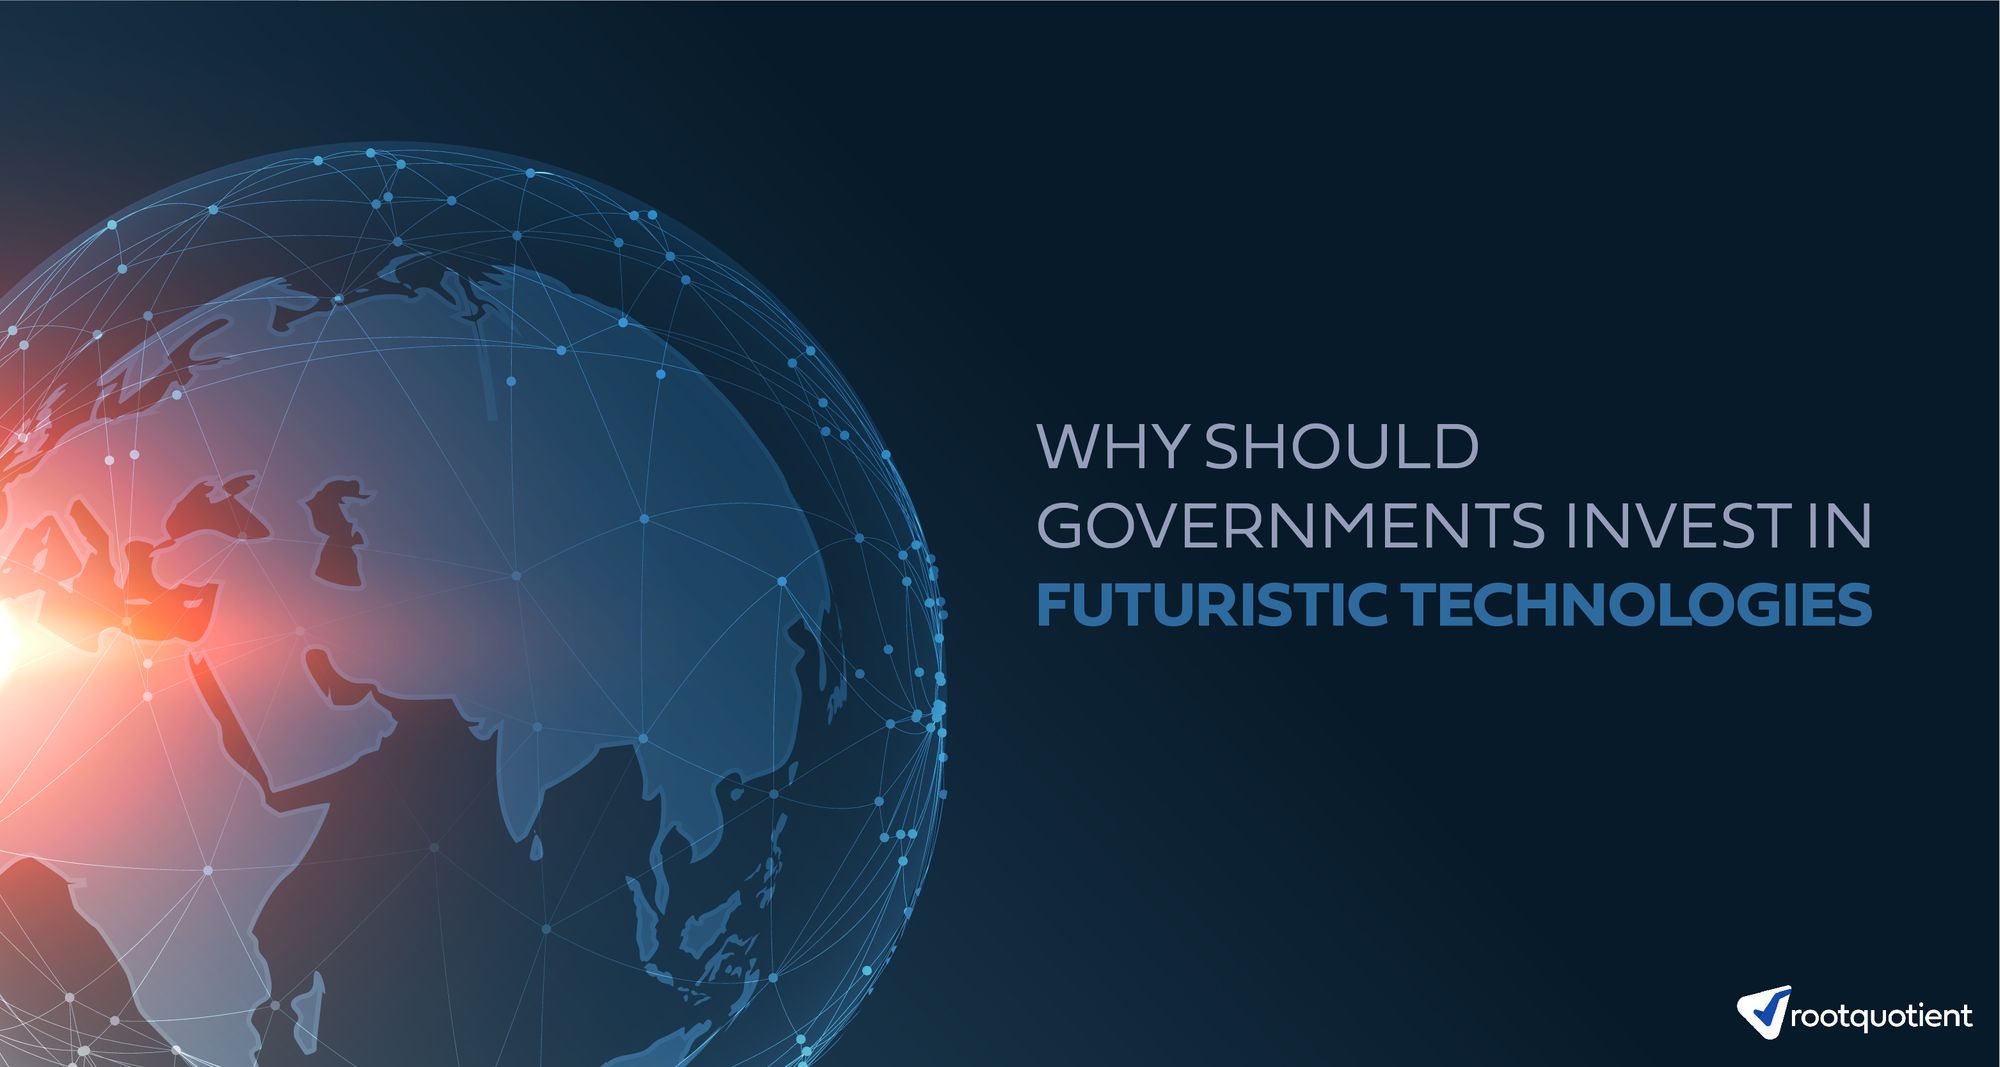 Why Should Governments Invest In Futuristic Technologies Like AI?